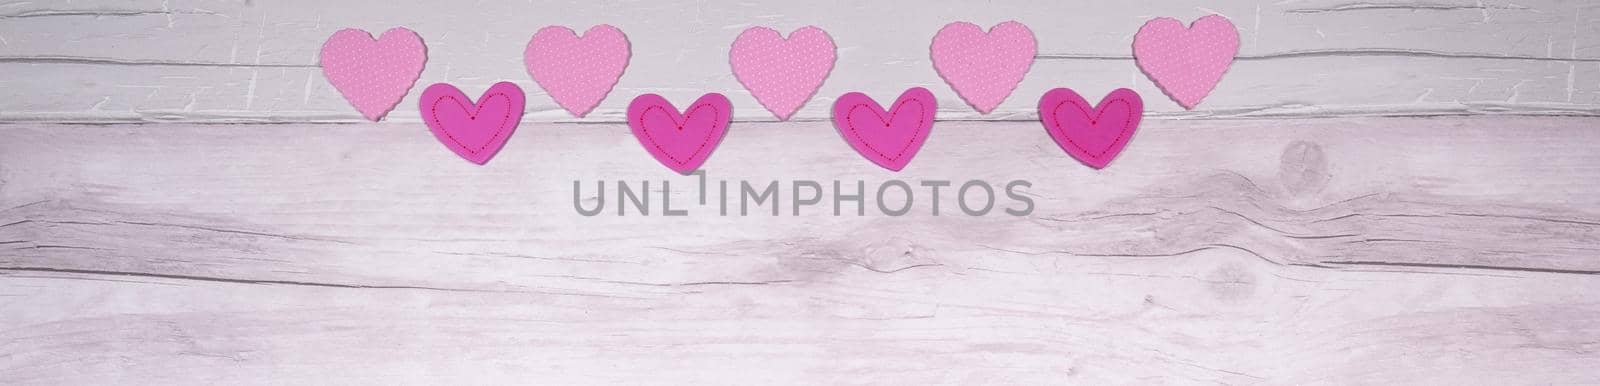 Pink felt hearts on a background of old wooden planks resembling an old parquet floor. Concept of valentines day and love in general by jp_chretien